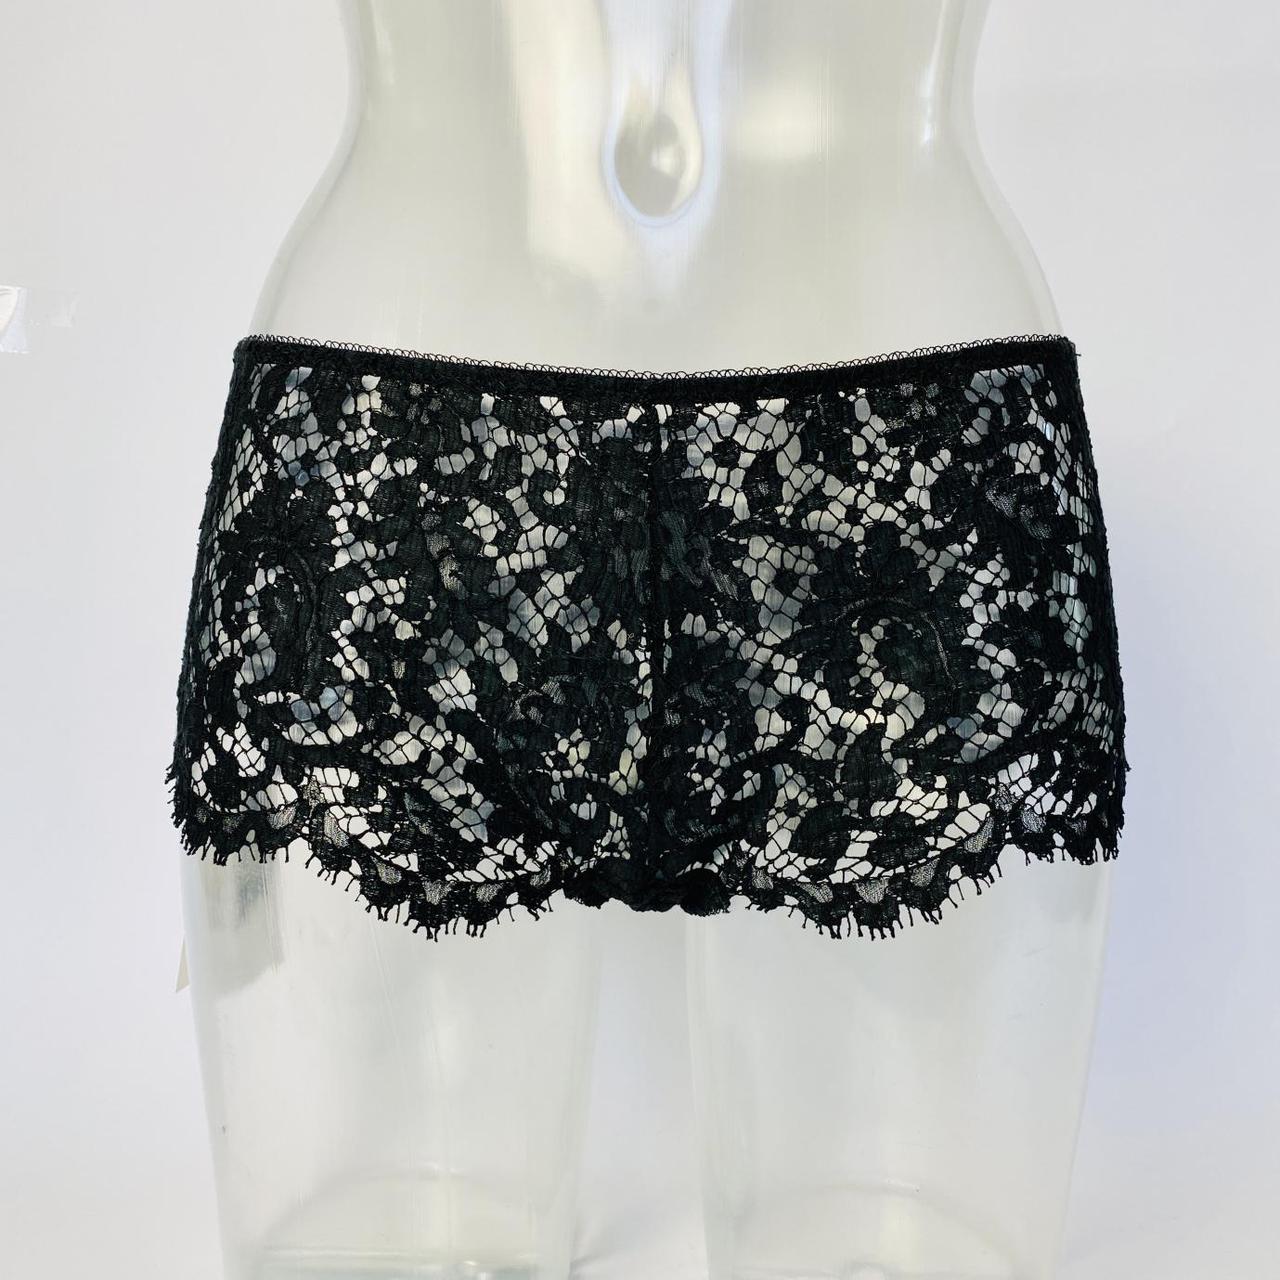 Freolic London - french lace brief shorts in size M